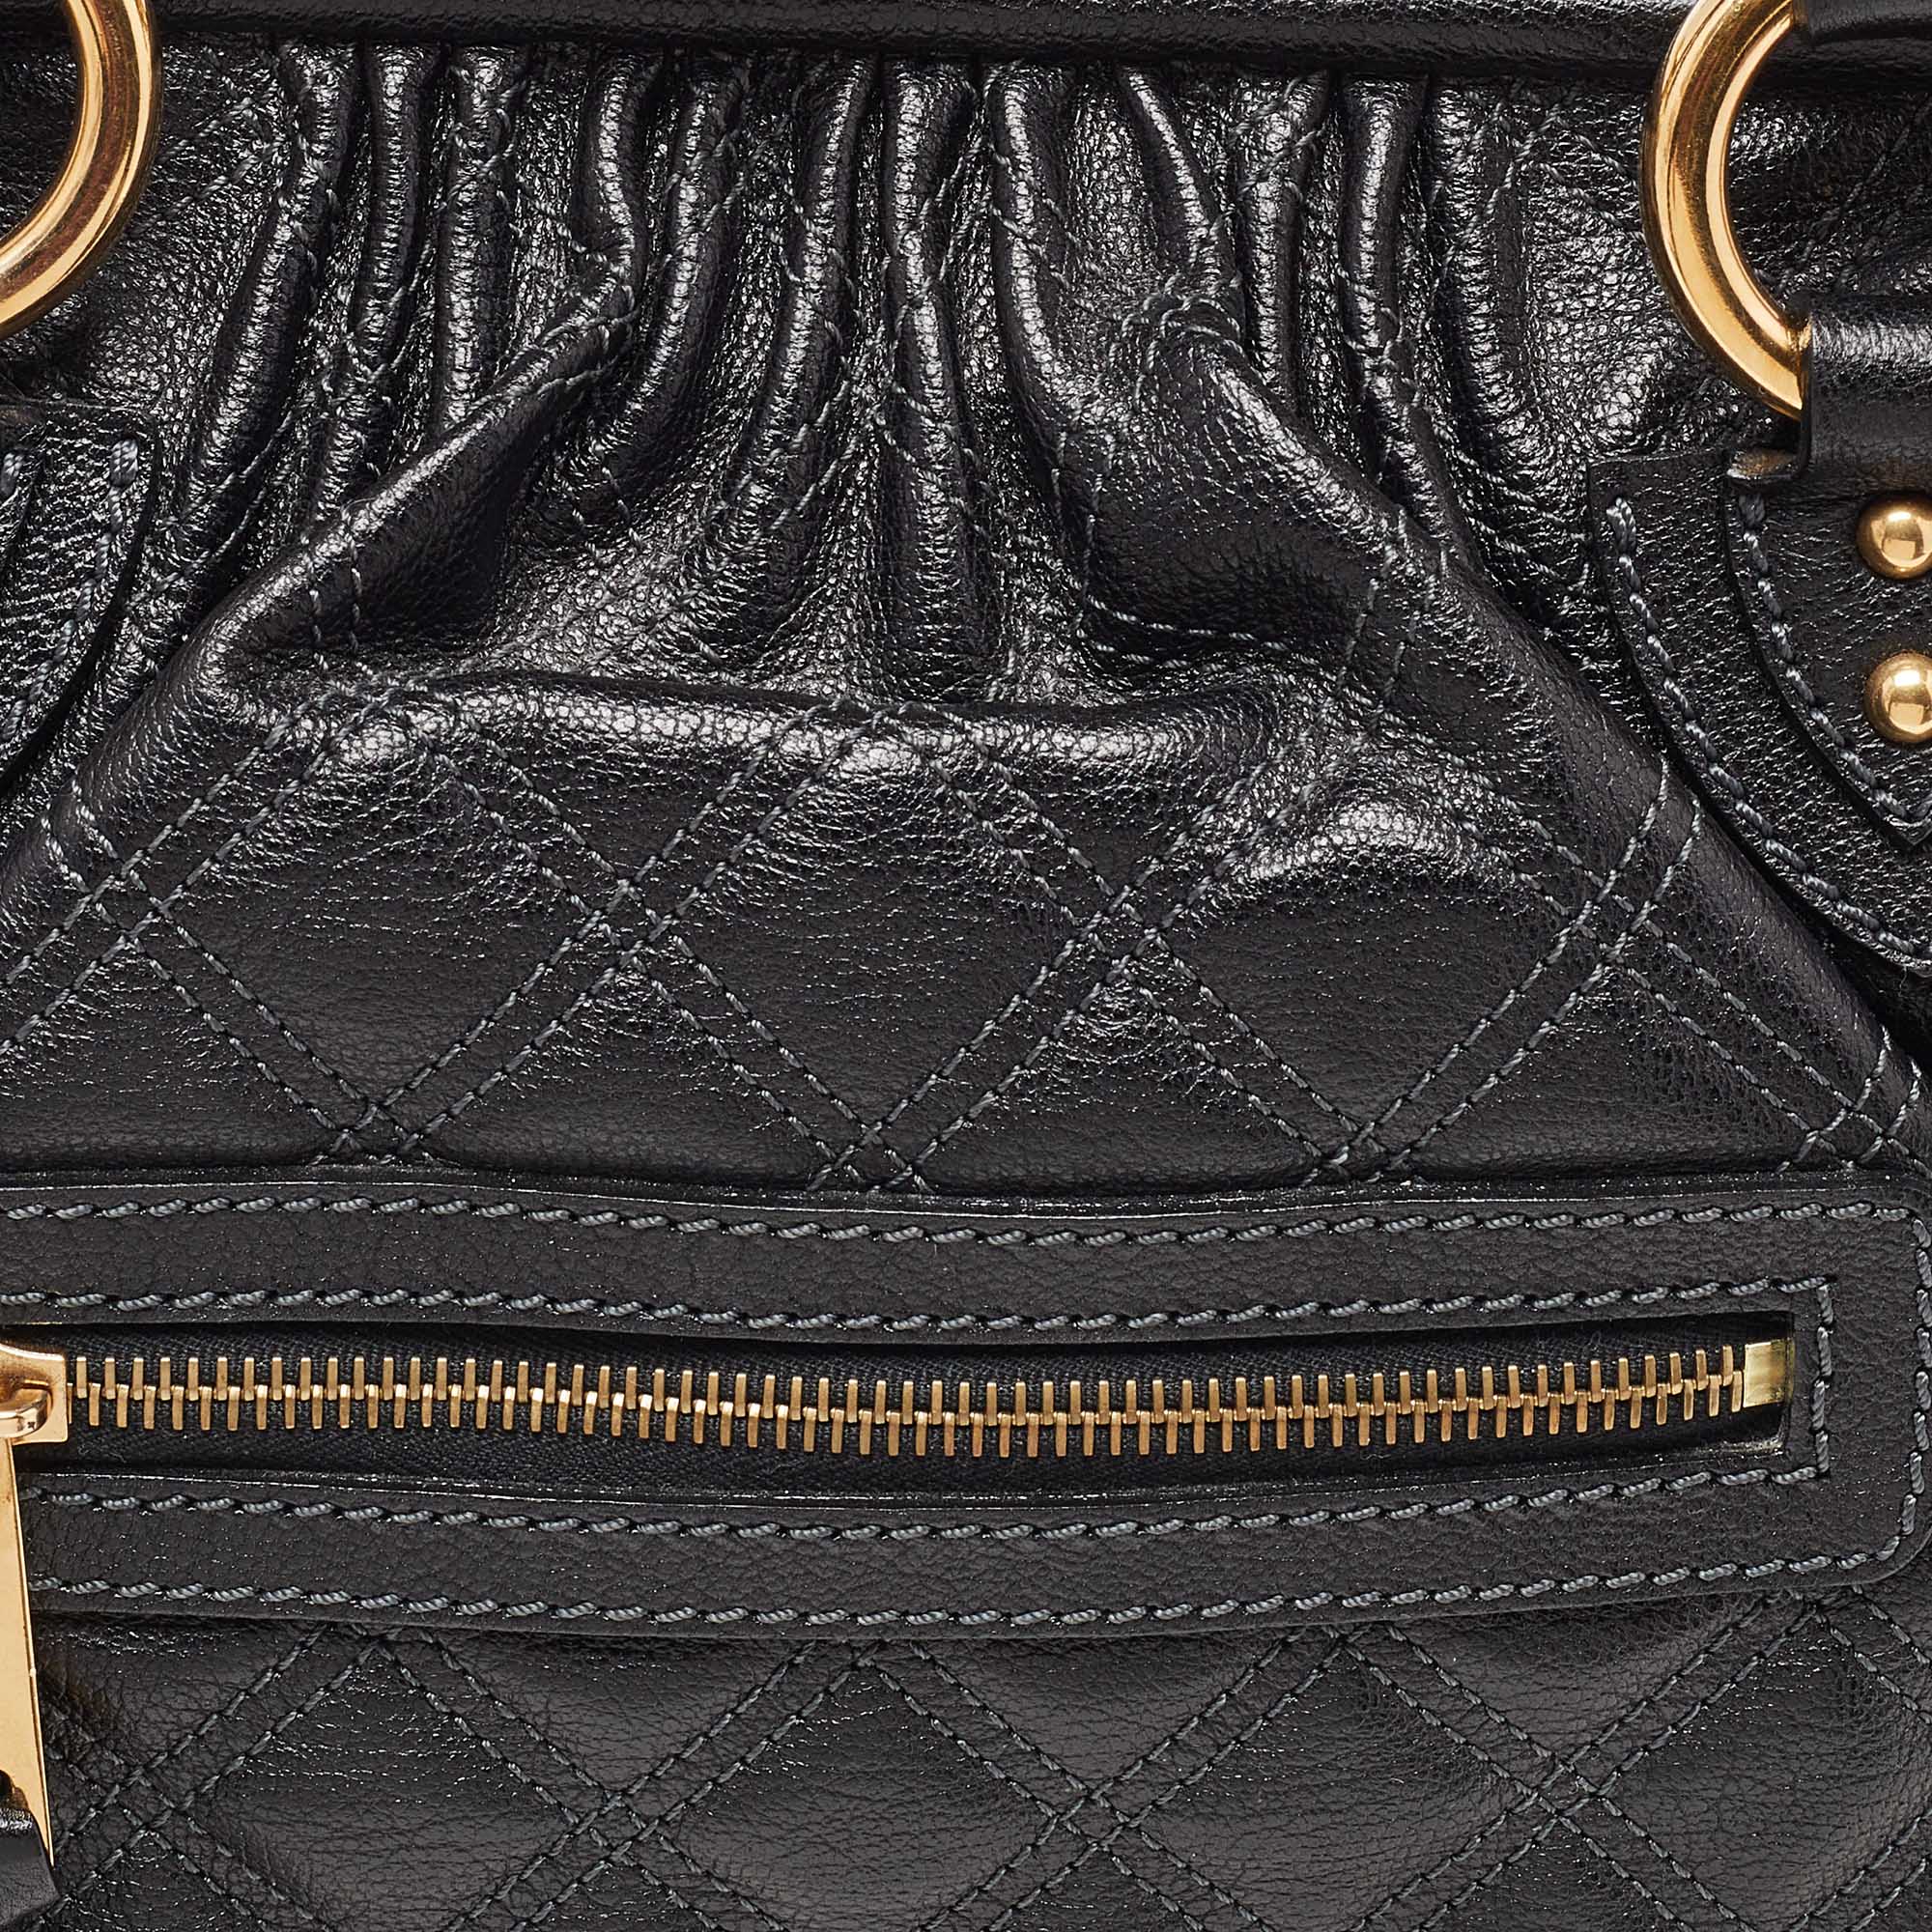 Marc Jacobs Black Quilted Leather Stam Satchel